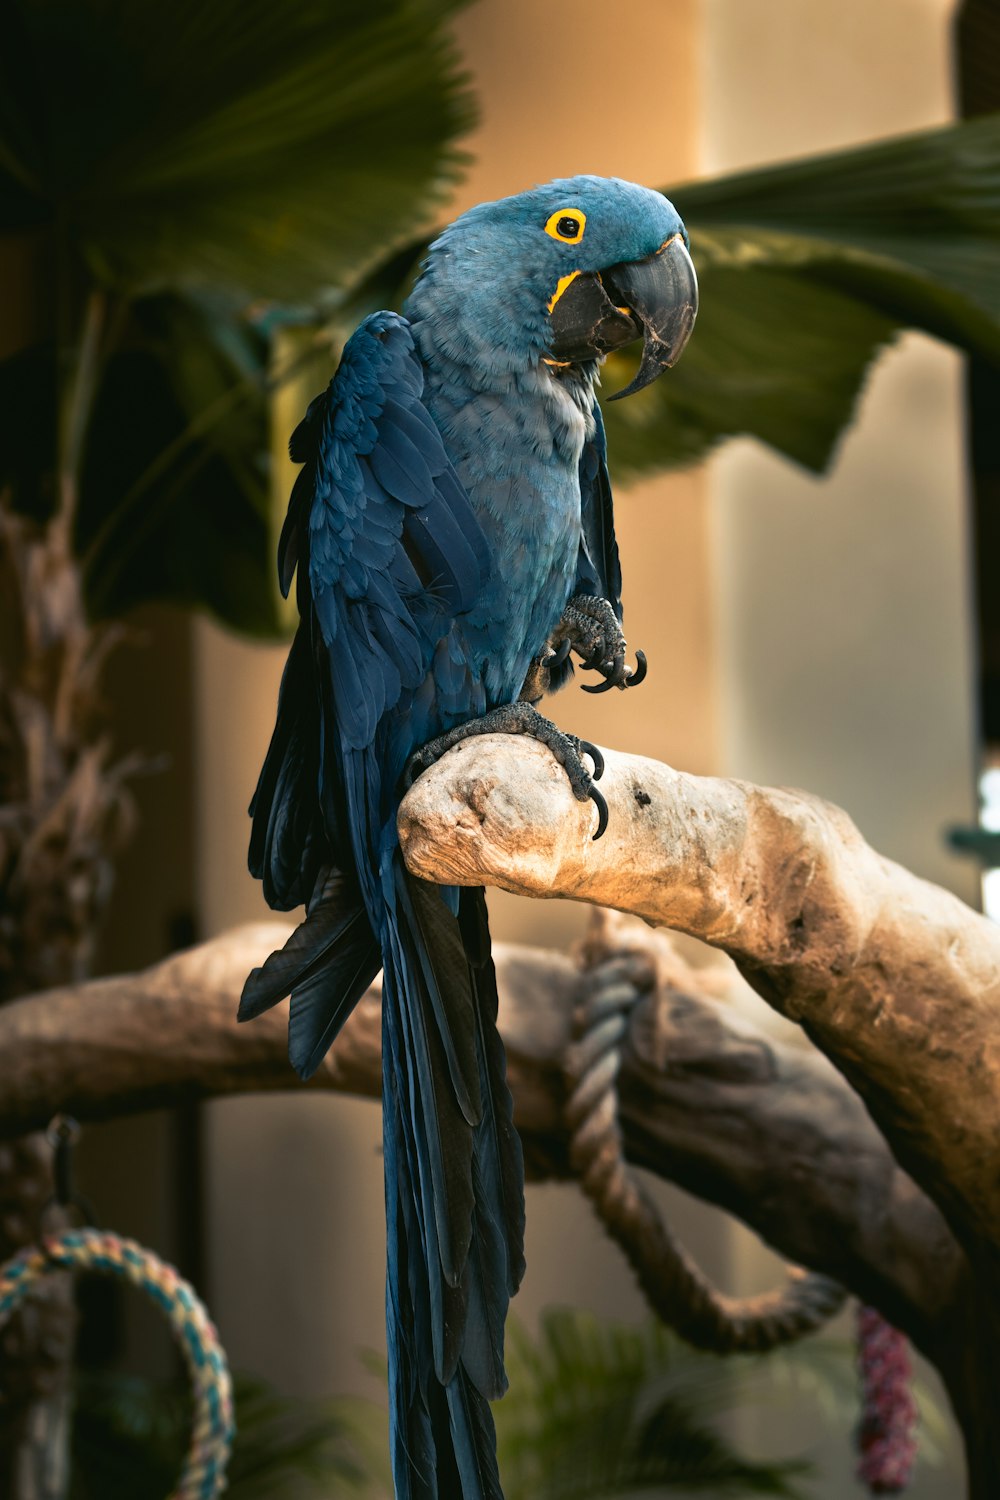 blue and yellow macaw perched on brown tree branch